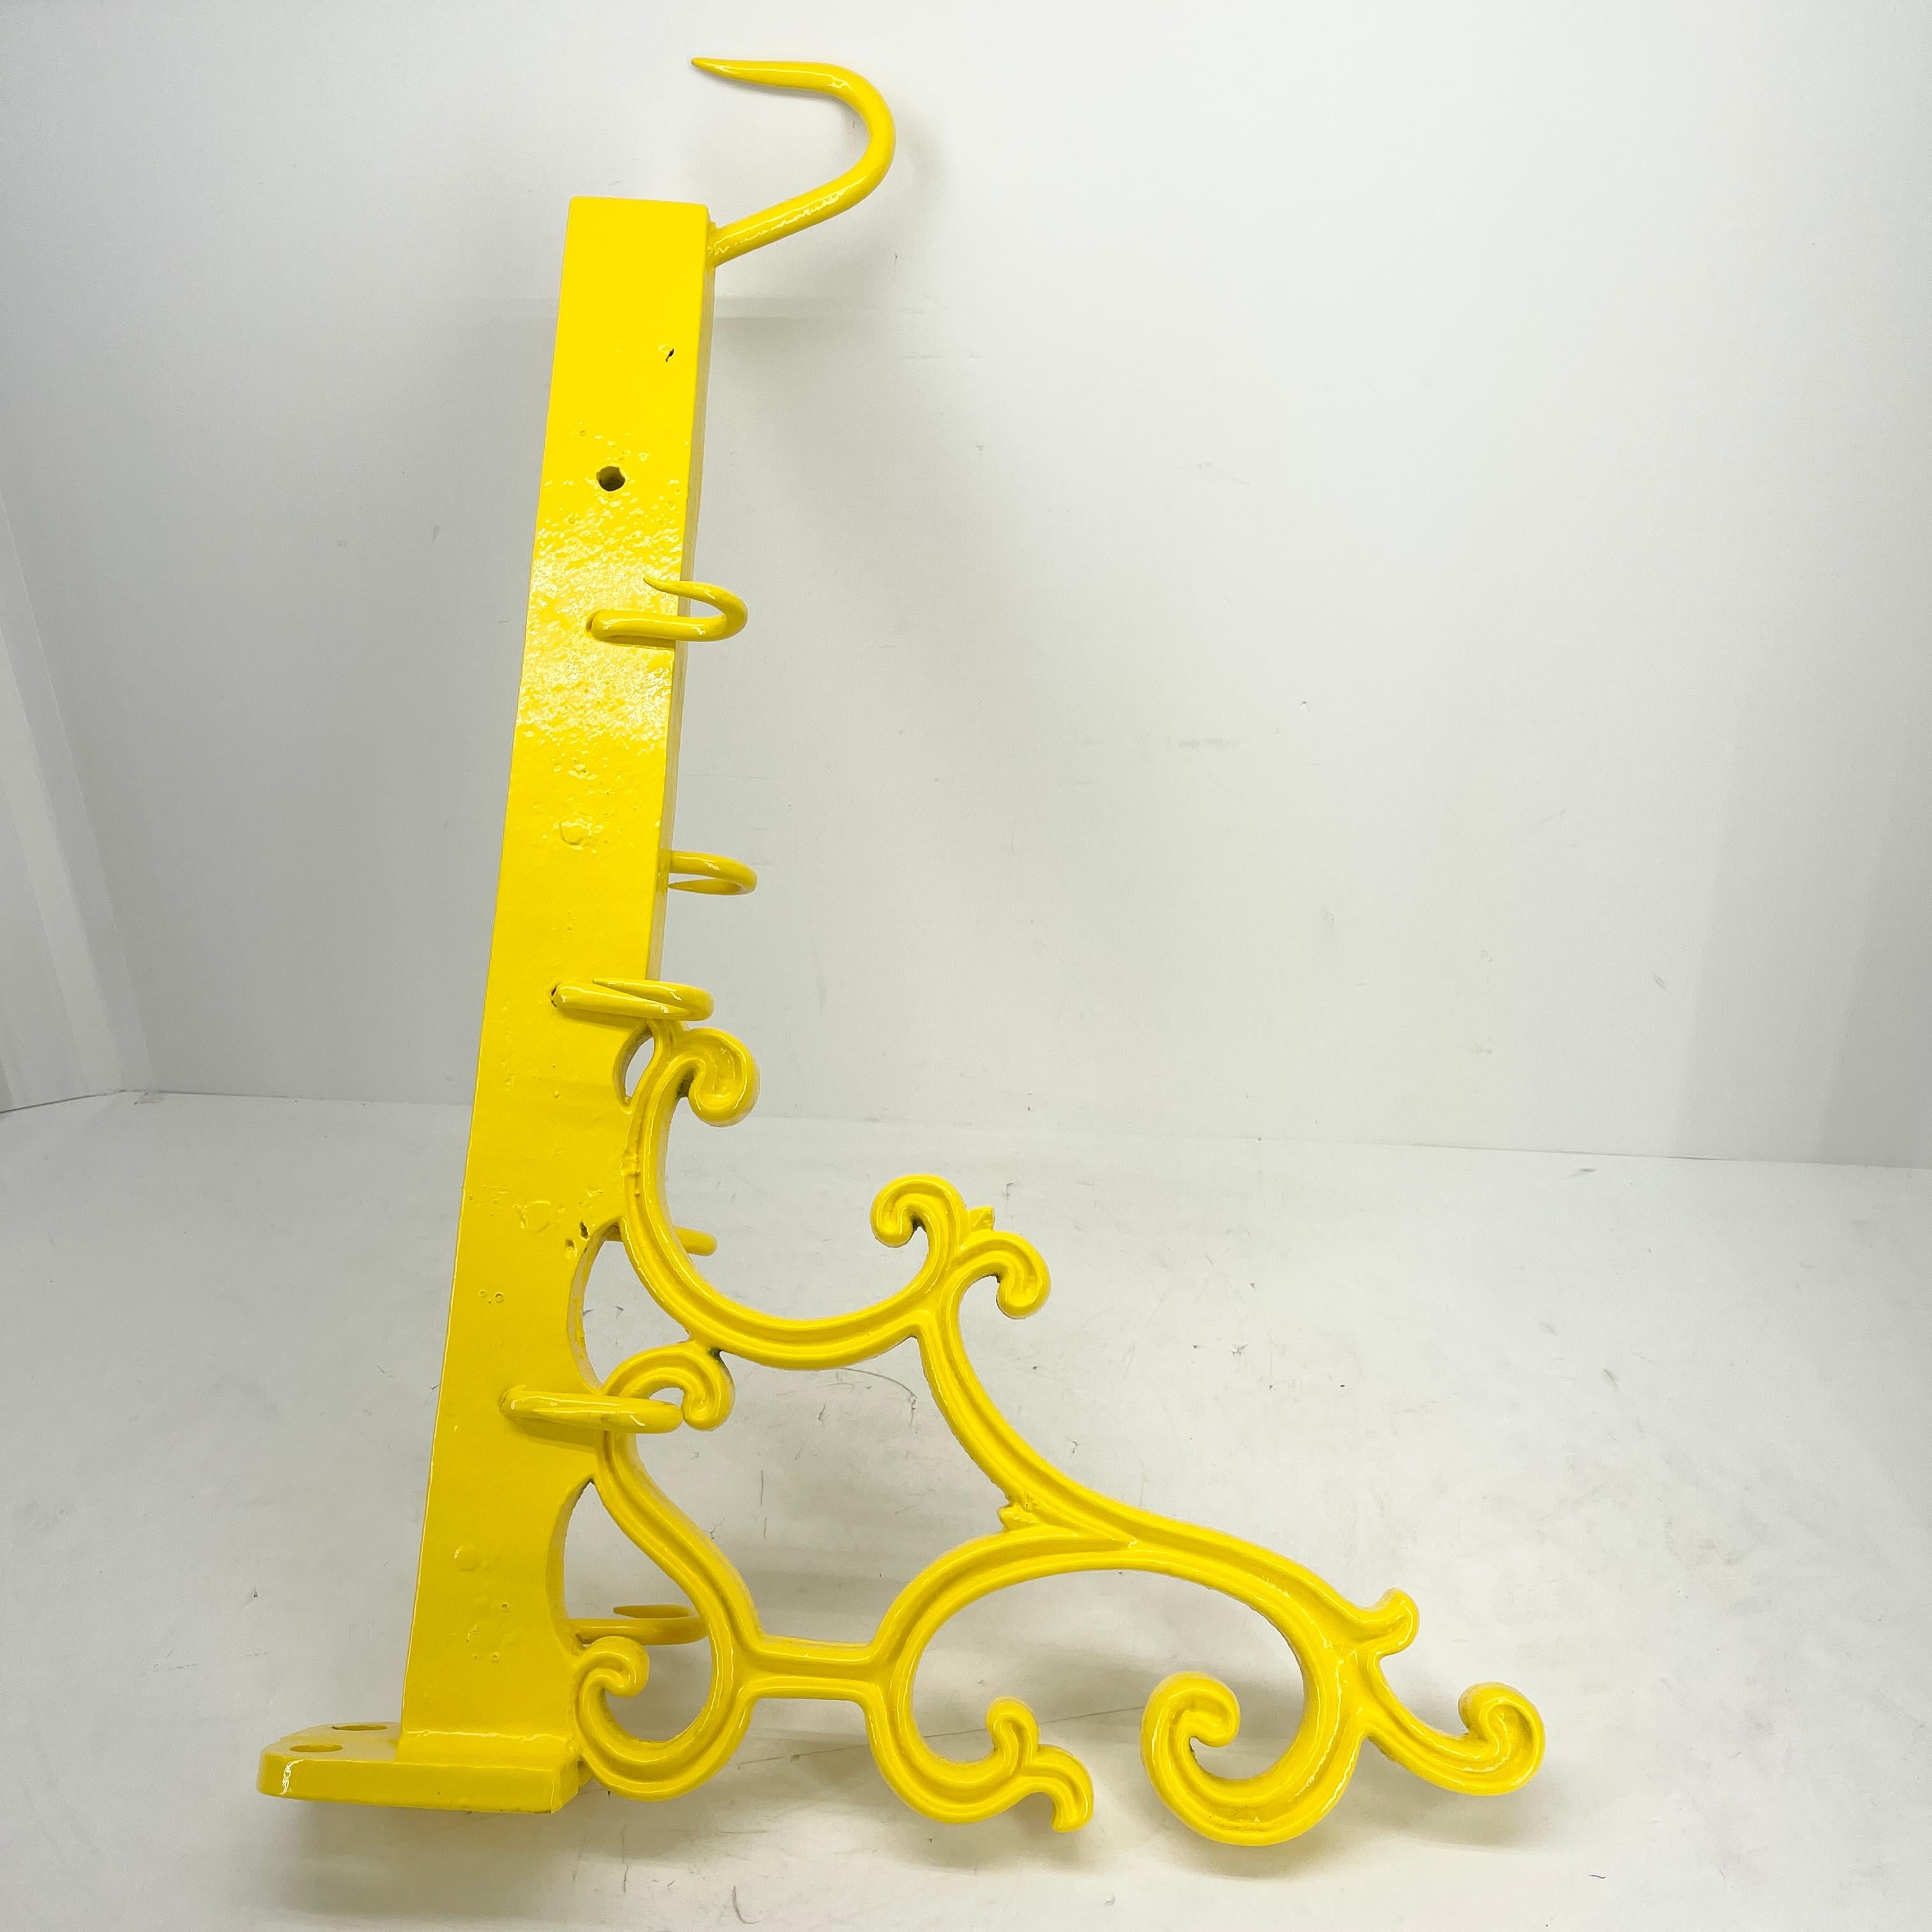 Large and bold this large industrial era meat hook has been freshly powder coated in bright sunshine yellow. Feast your eyes on this bold statement collectible piece! Hanging in the kitchen or actually in any room, this meat hook is as functional as